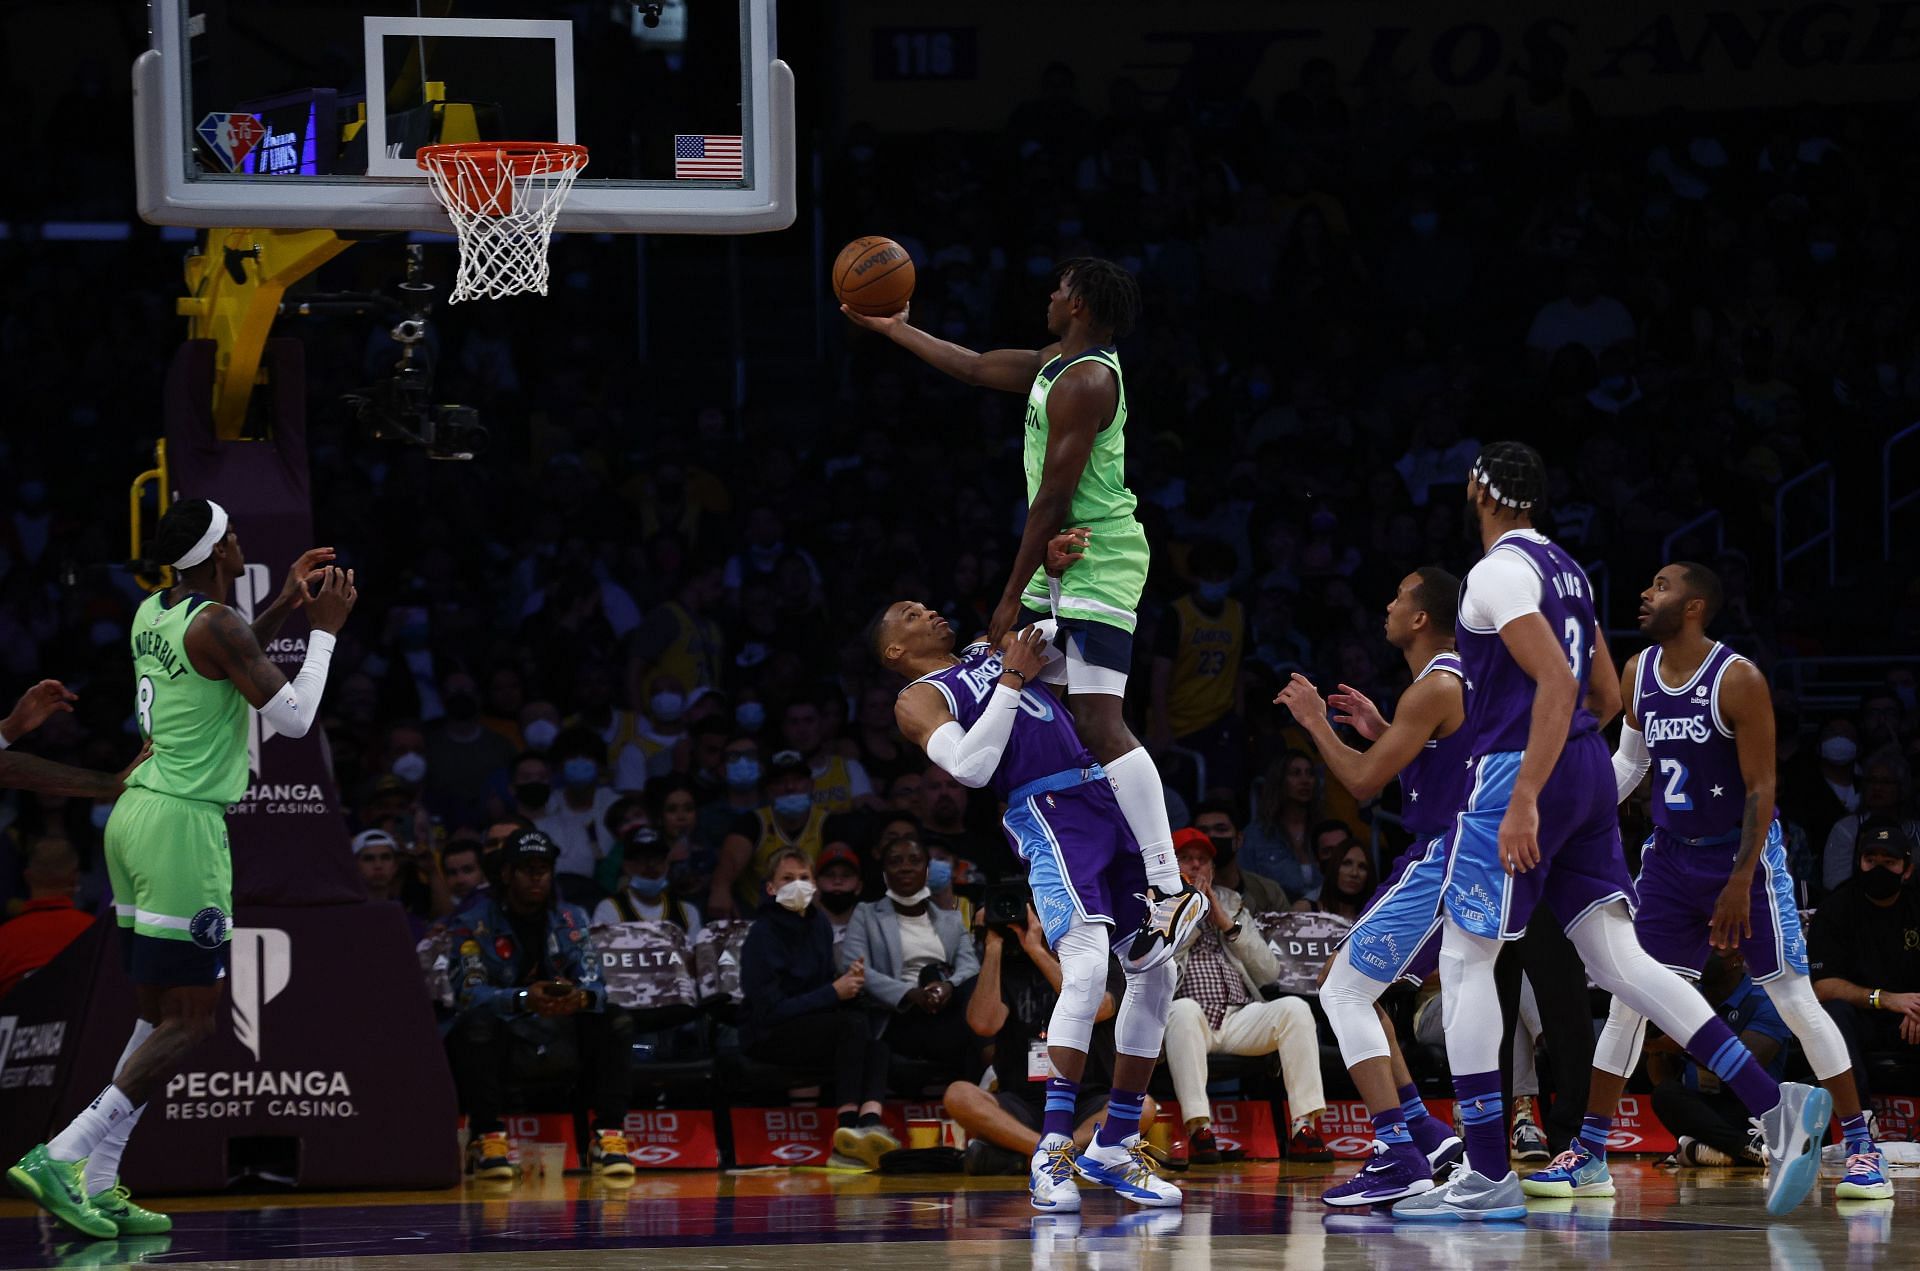 LA Lakers suffered a 25-point loss against Minnesota Timberwolves on Friday